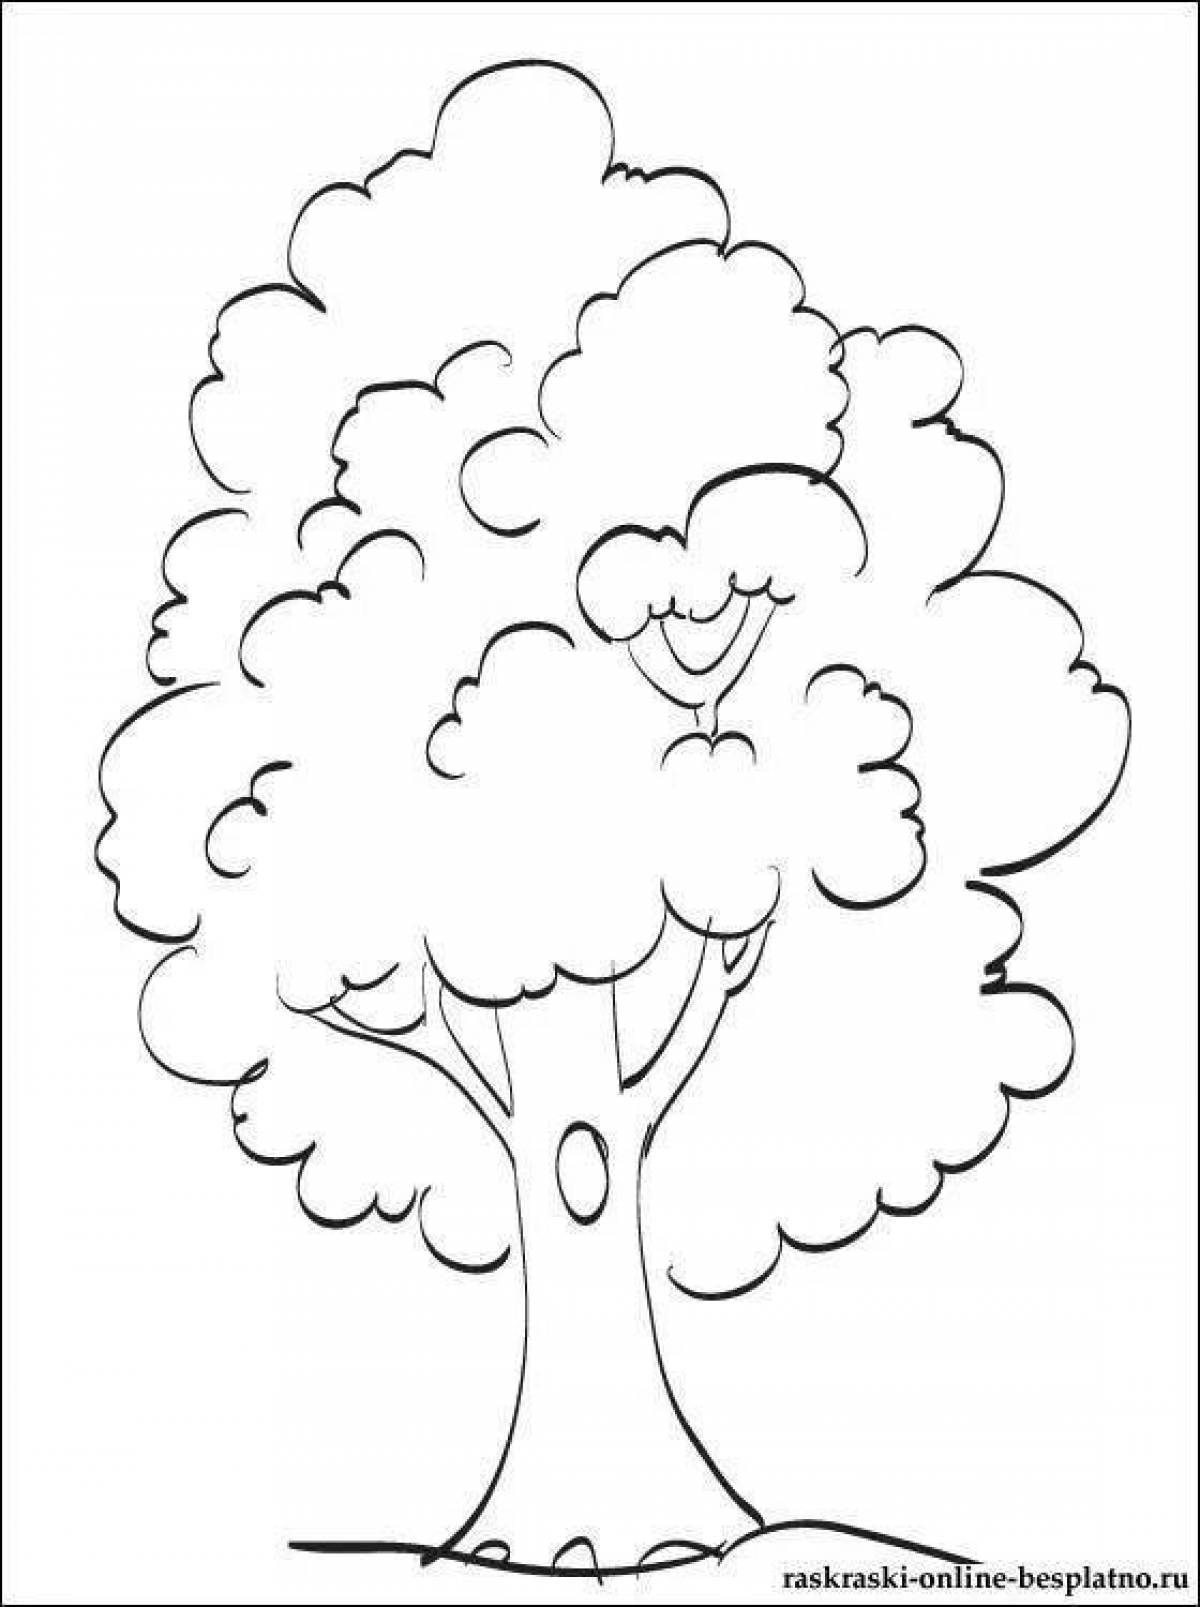 Colorful art tree coloring book for kids